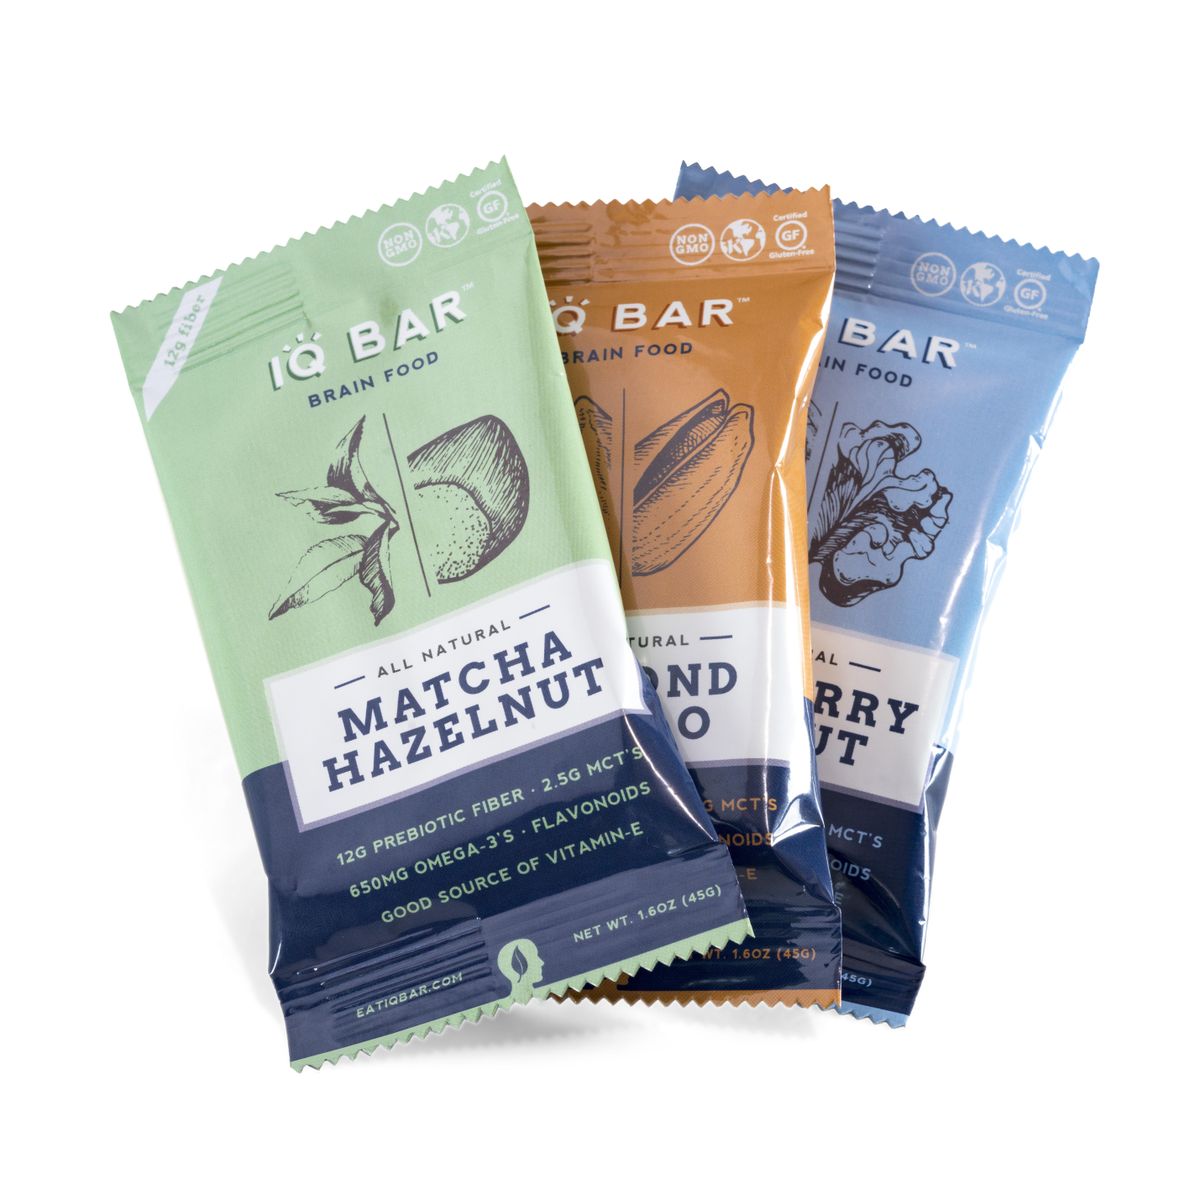 These new IQ Bars, aimed at supporting brain health, are produced in Spokane Valley. (Courtesy of Will Nitze)